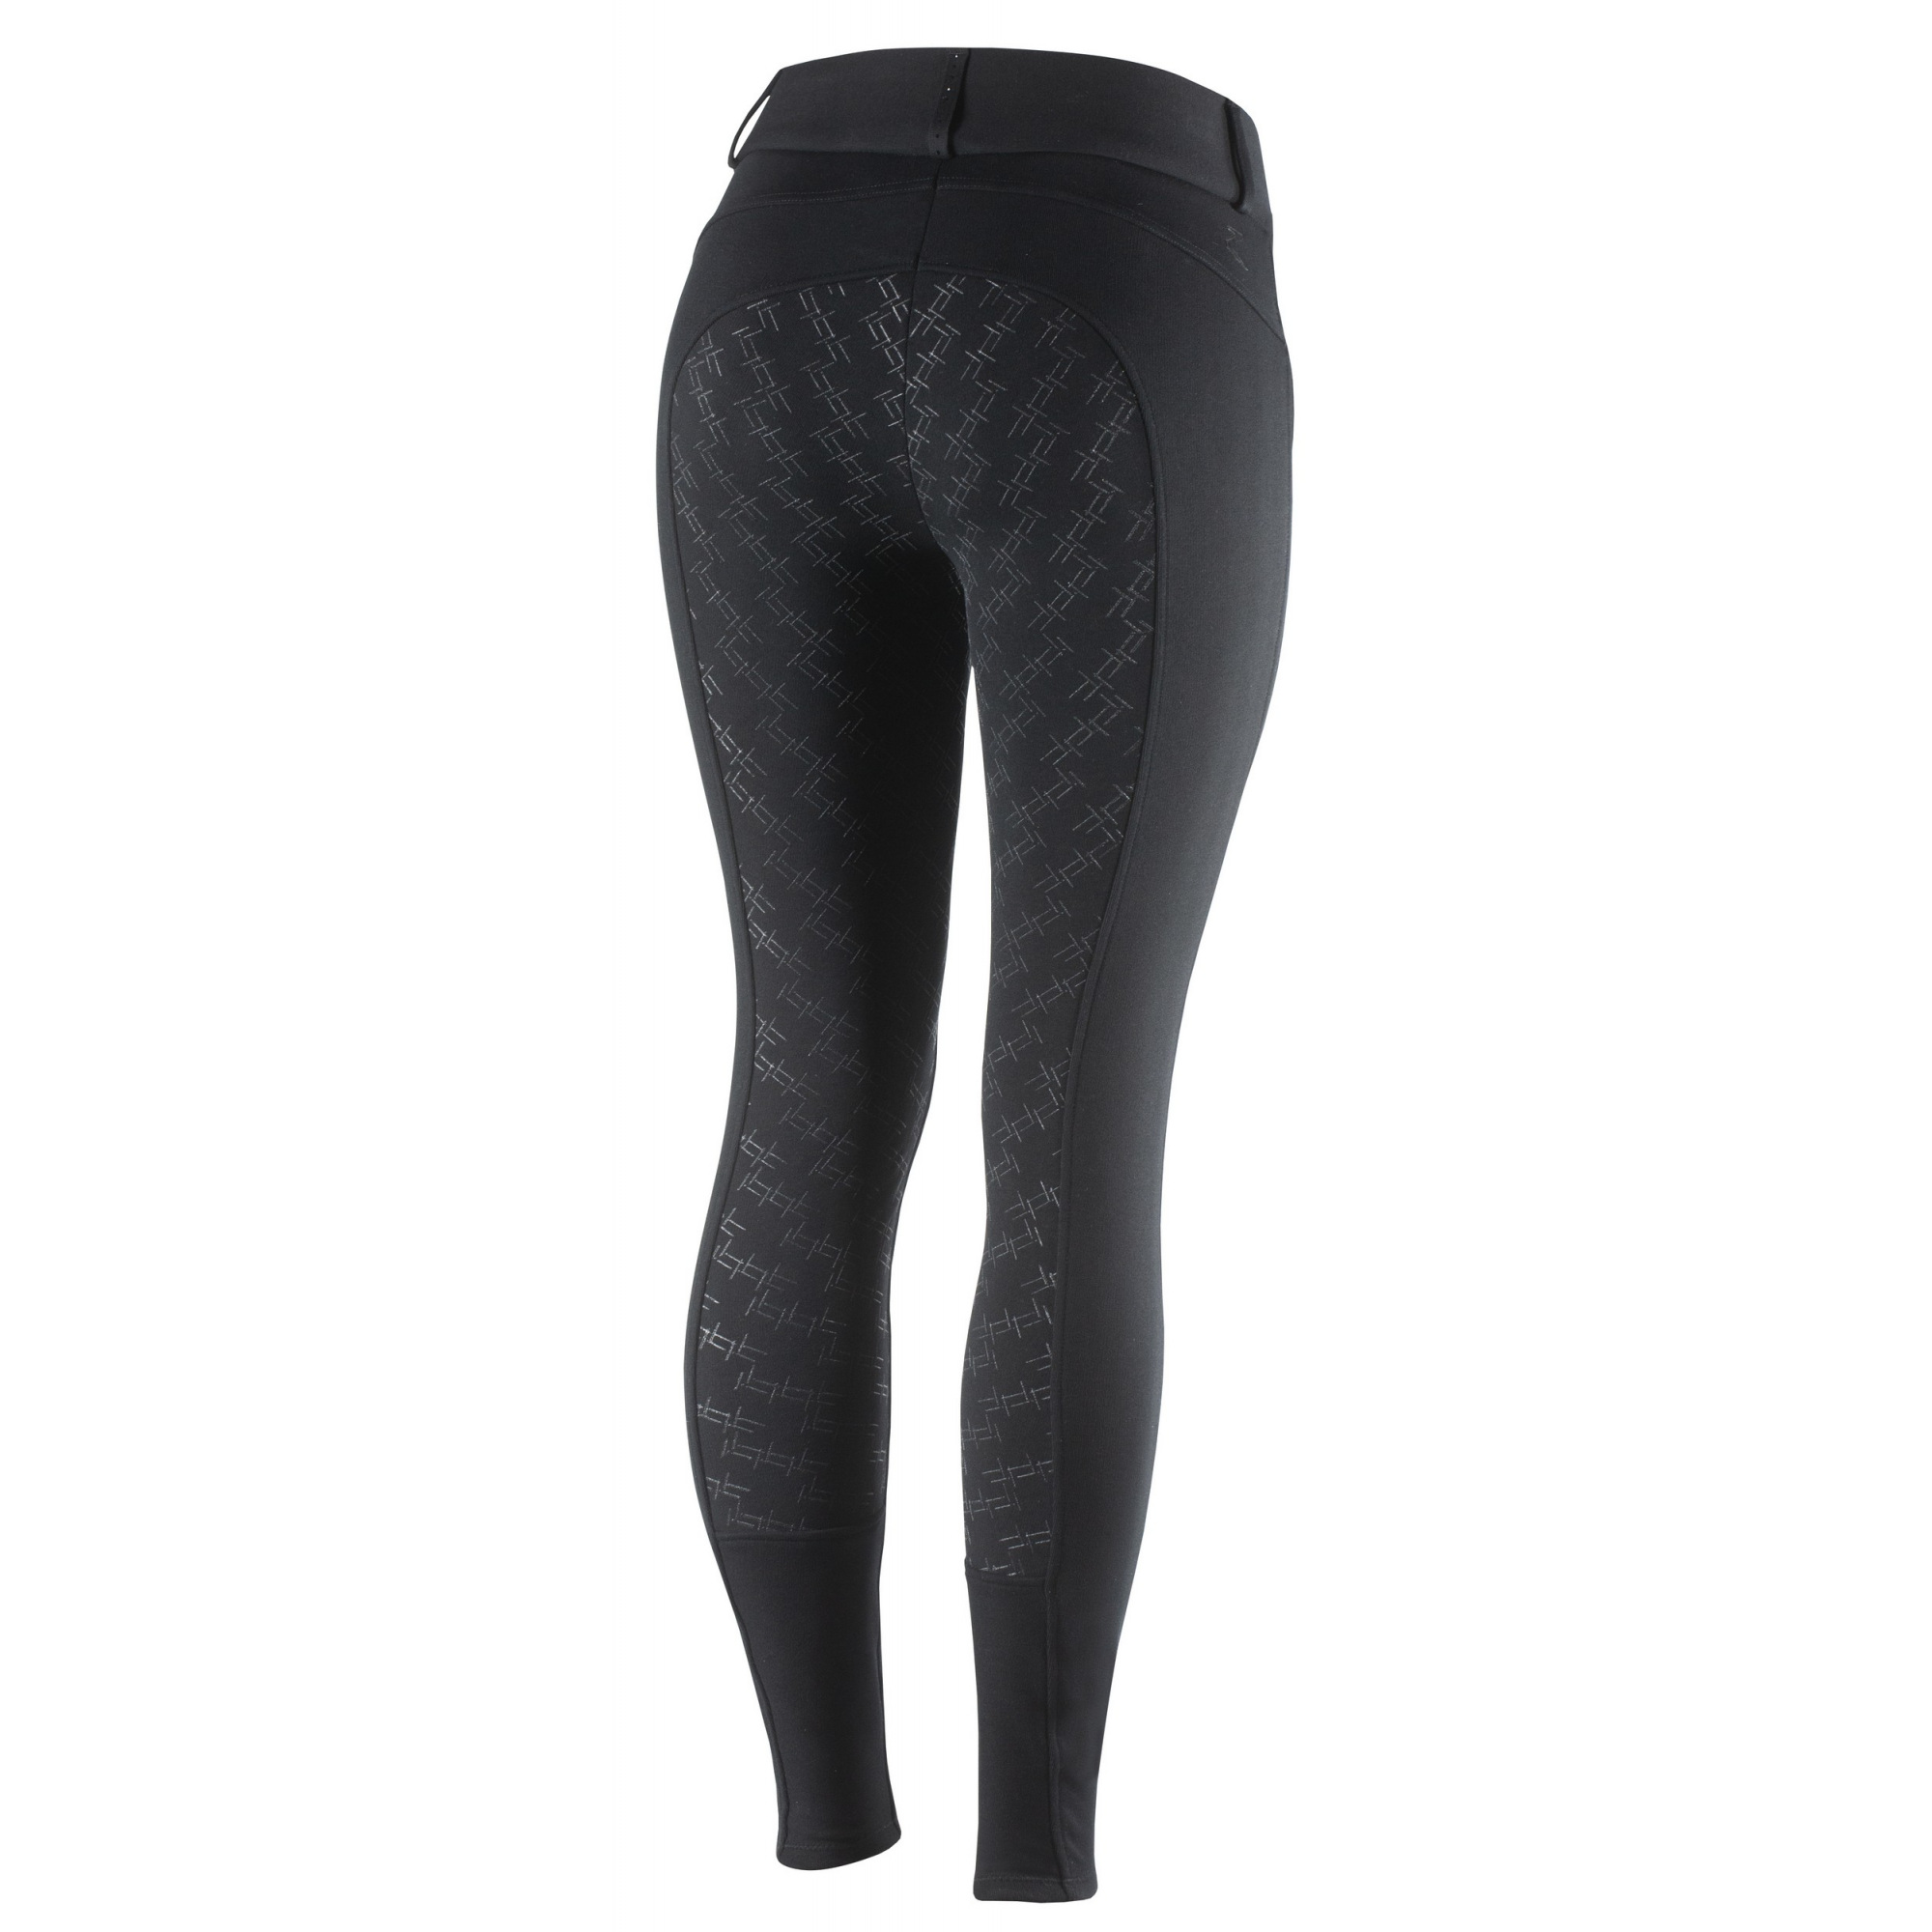 Horze Active Women's Full Grip Winter Riding Tights with Phone Pocket